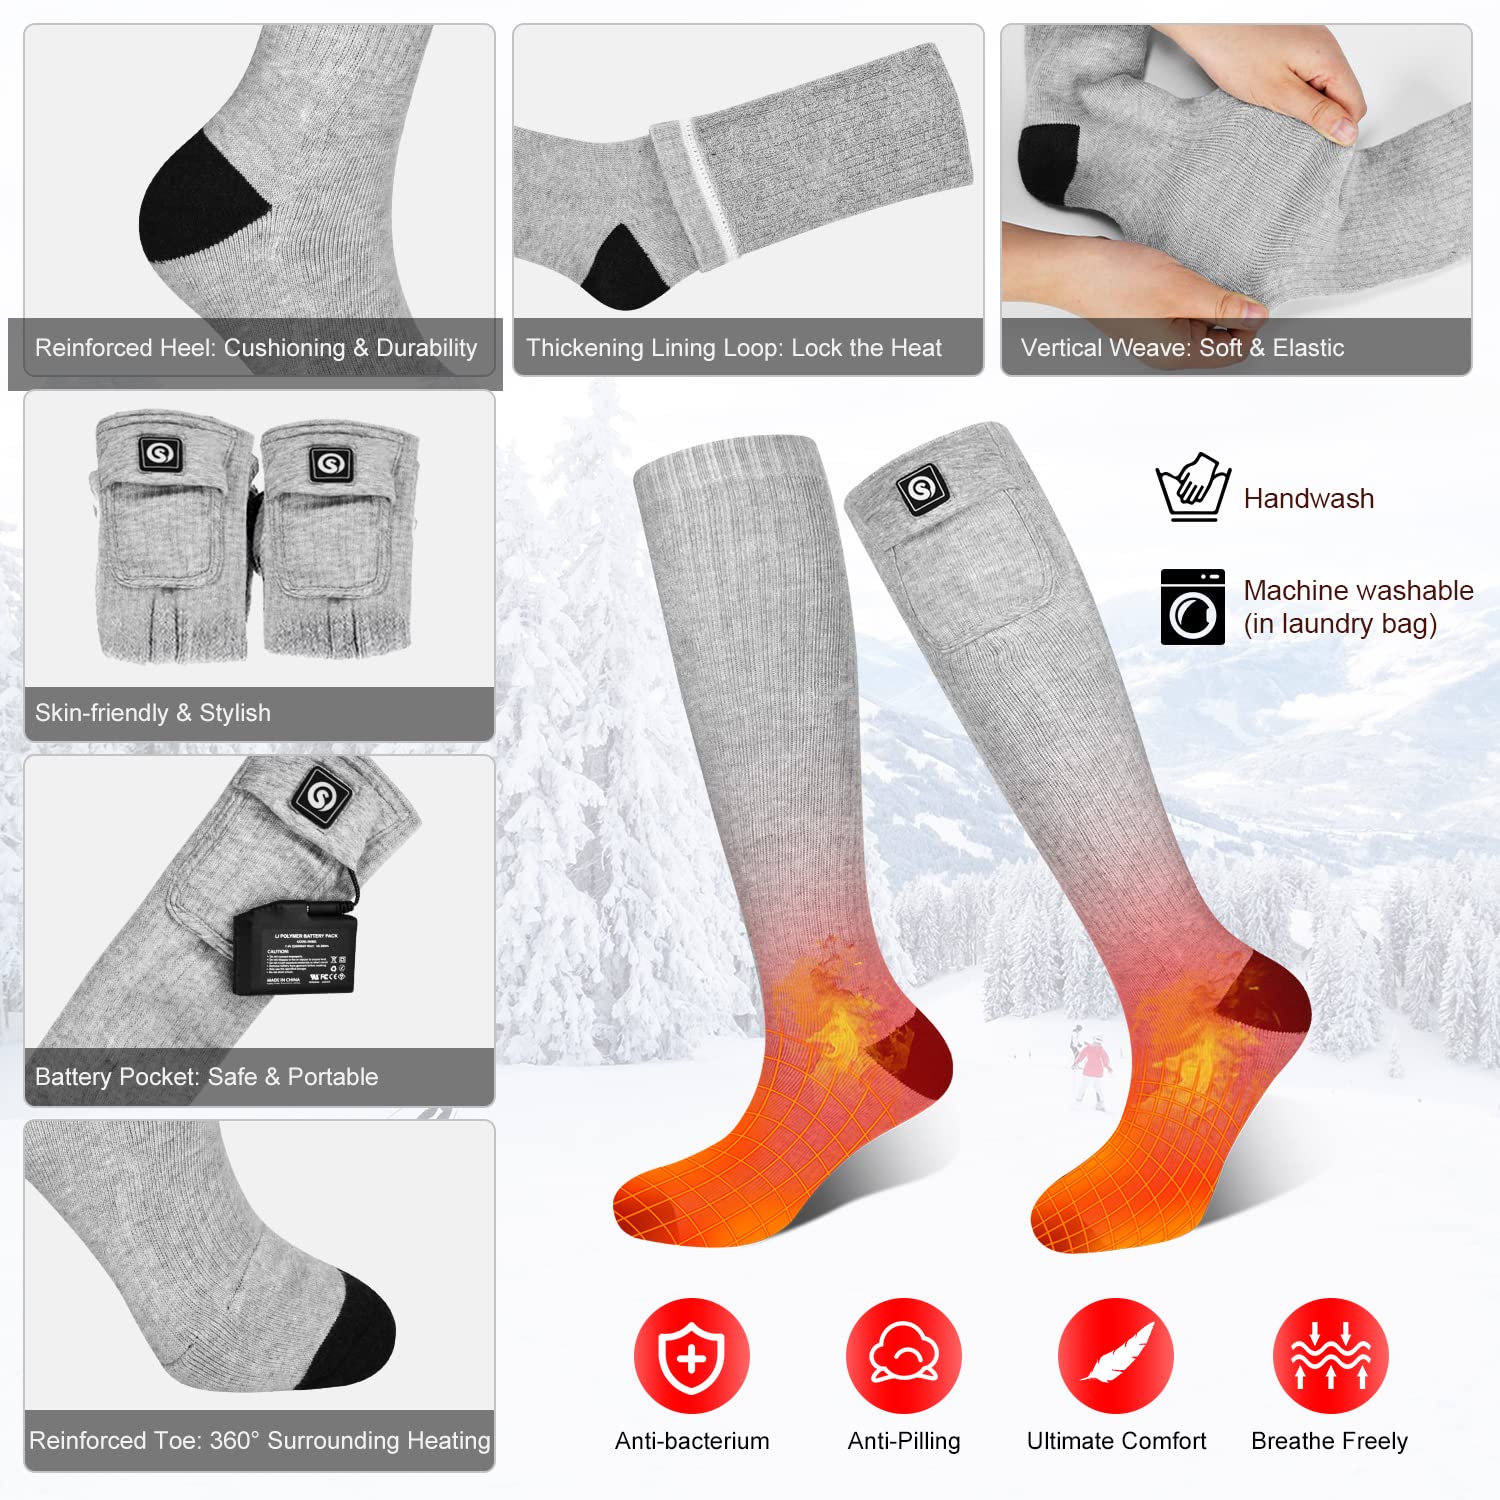 Heated Socks for Men Women,7.4V 2200mah Electric Rechargeable Battery Warm Winter Socks,Cold Weather Thermal Heating Socks Foot Warmers for Hunting Skiing Camping (Gray, Large)